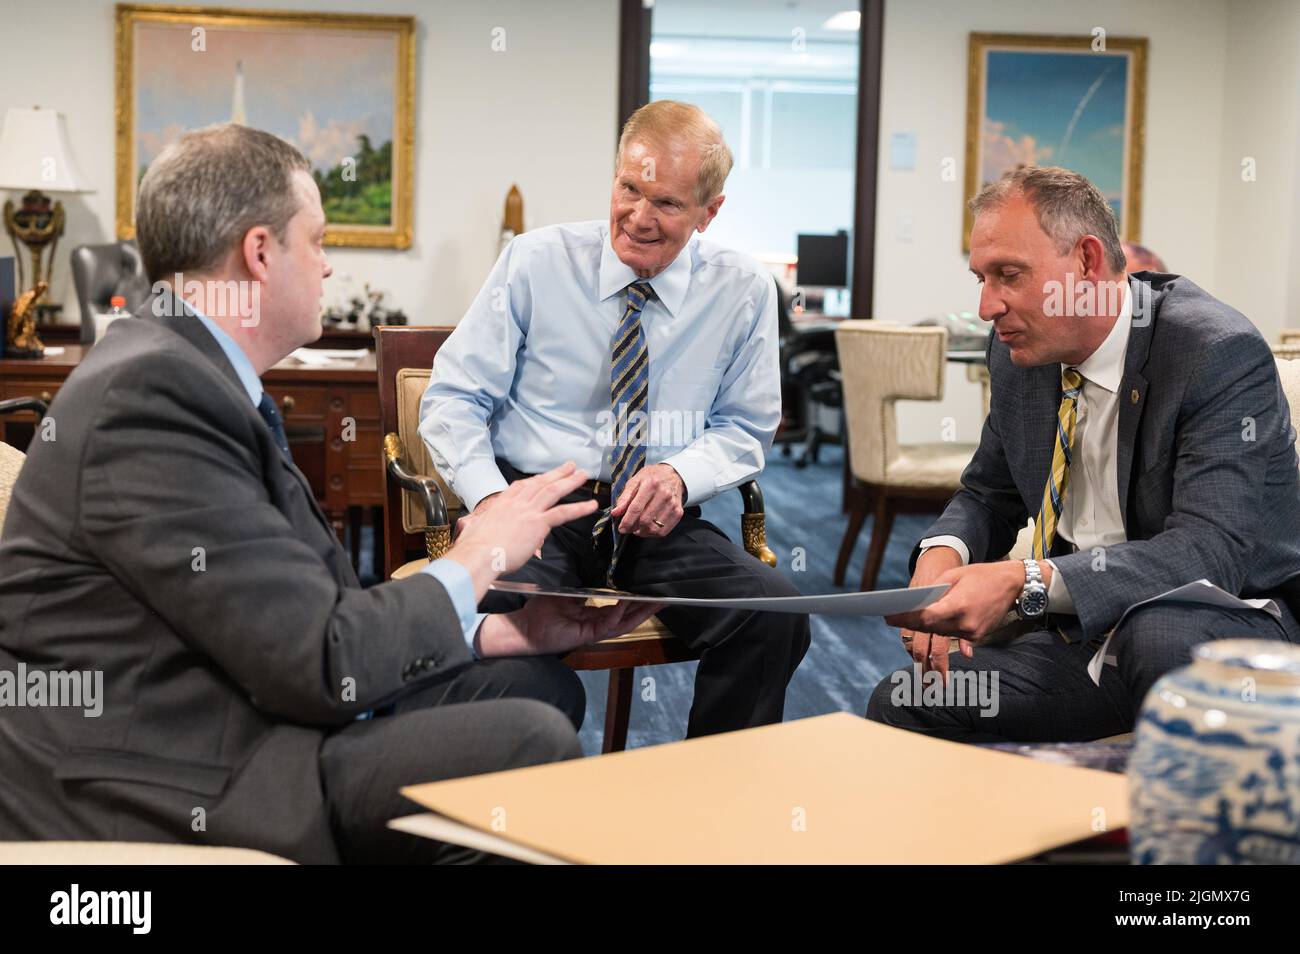 NASA Administrator Bill Nelson, center, and Associate Administrator for NASA's Science Mission Directorate, Thomas Zurbuchen, right, speak with Webb project scientist at the Space Telescope Science Institute, Klaus Pontoppidan, left, after being shown the first full-color images from NASA's James Webb Space Telescope in a preview meeting, Monday, July 11, 2022, at the Mary W. Jackson NASA Headquarters building in Washington. The first images and spectroscopic data from the world's largest and most powerful space telescope, set to be released July 11 and 12, will demonstrate Webb at its full po Stock Photo